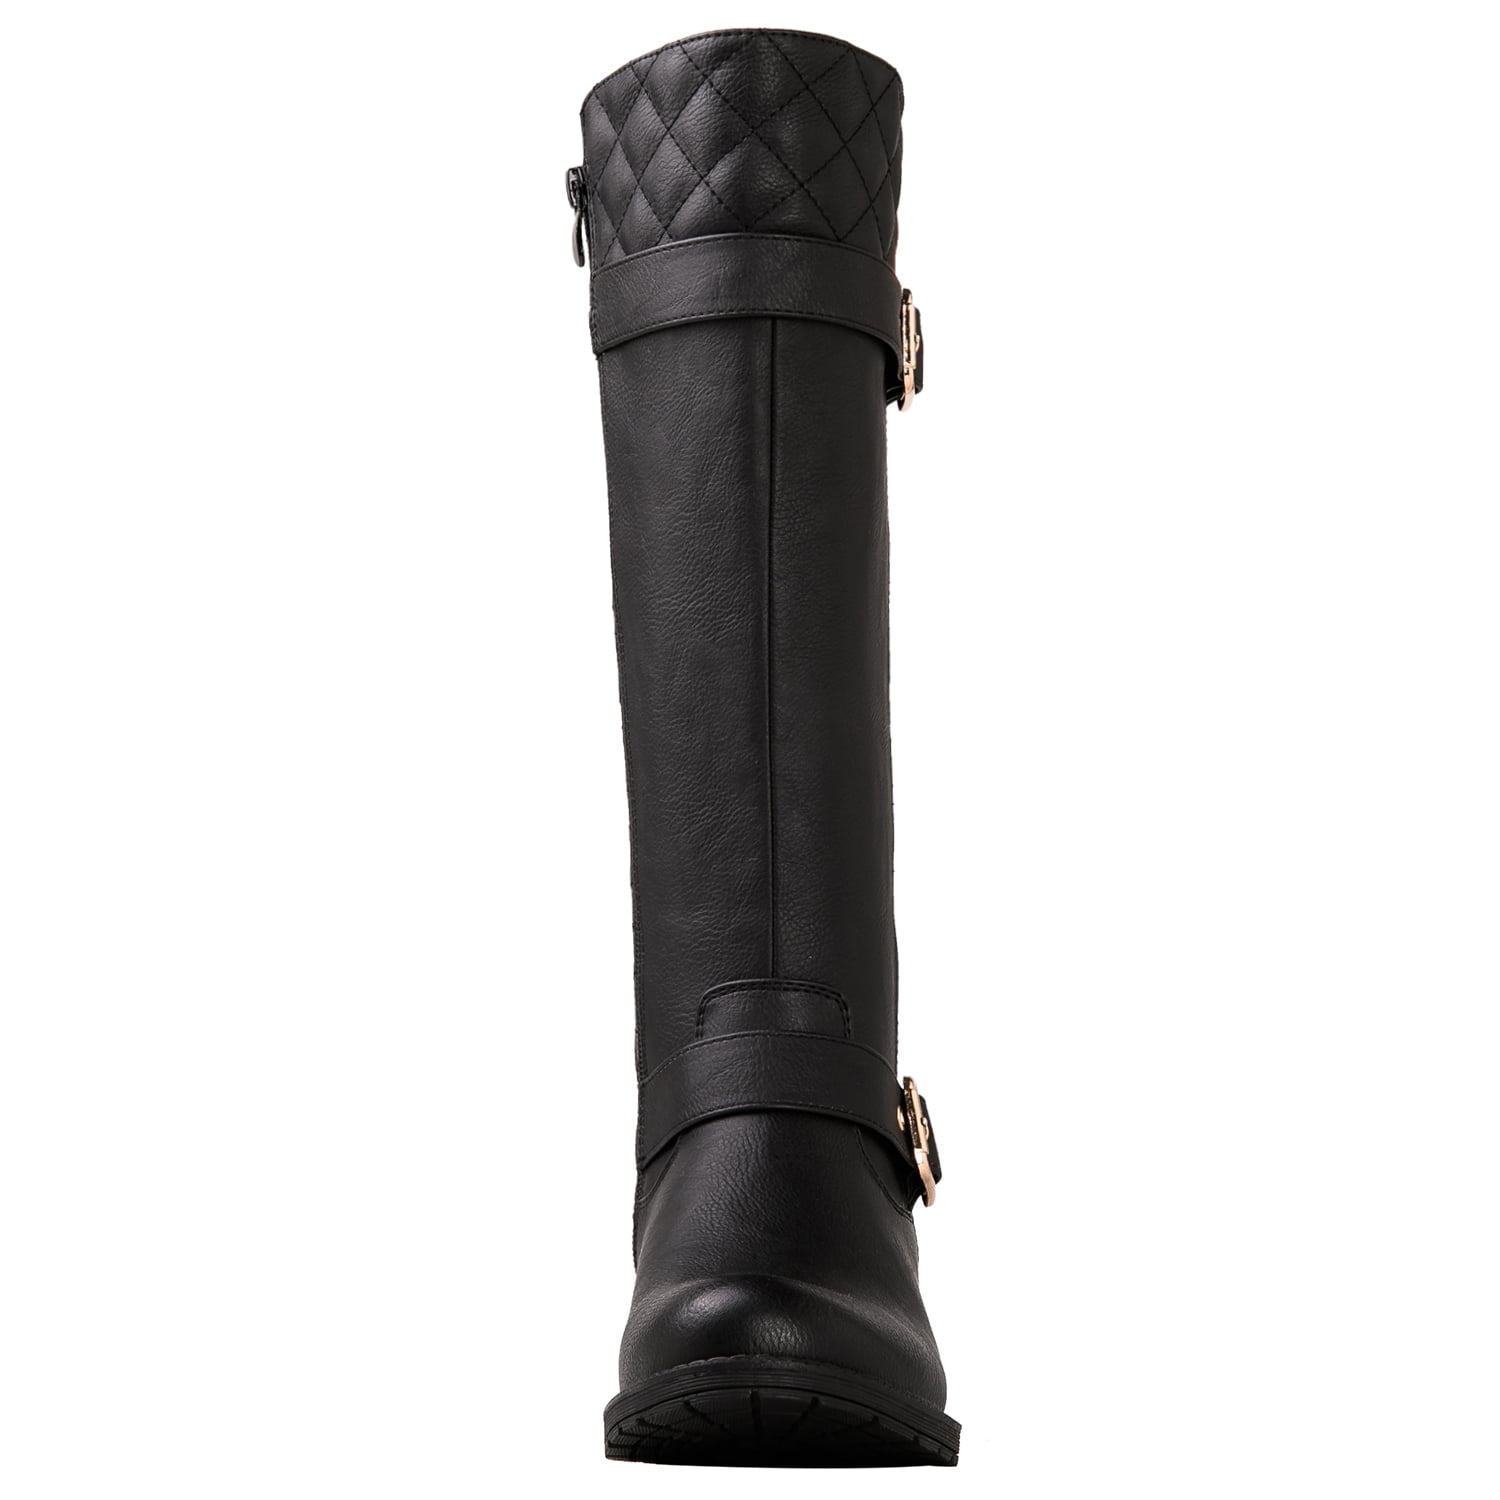 GLOBALWIN Women's Quilted Knee-High Fashion Boots 